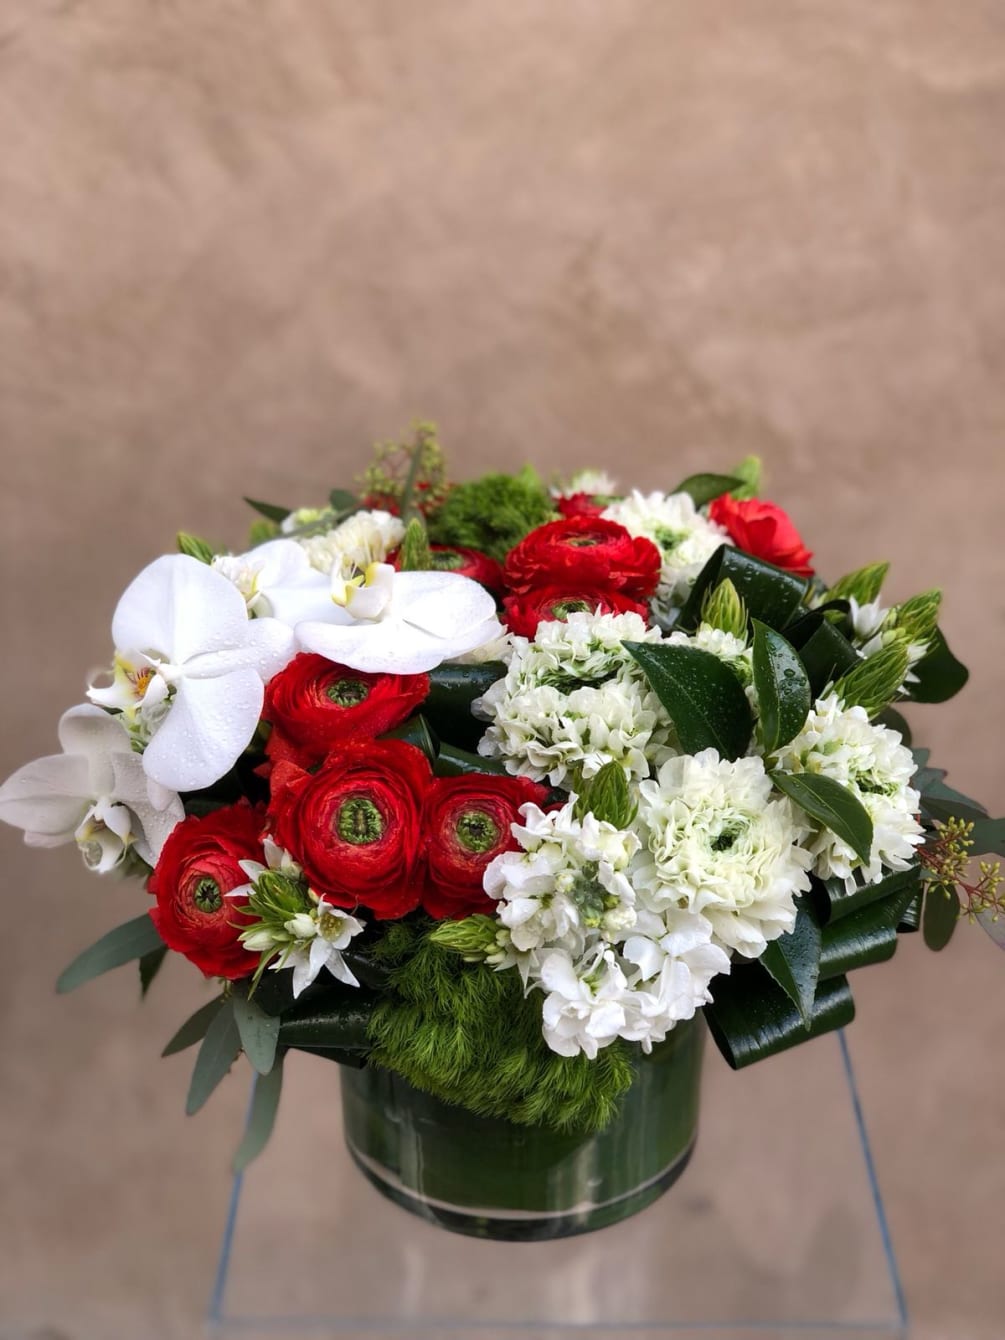 Classic and Morden arrangement with red and white ranunculus, stocks, and touch